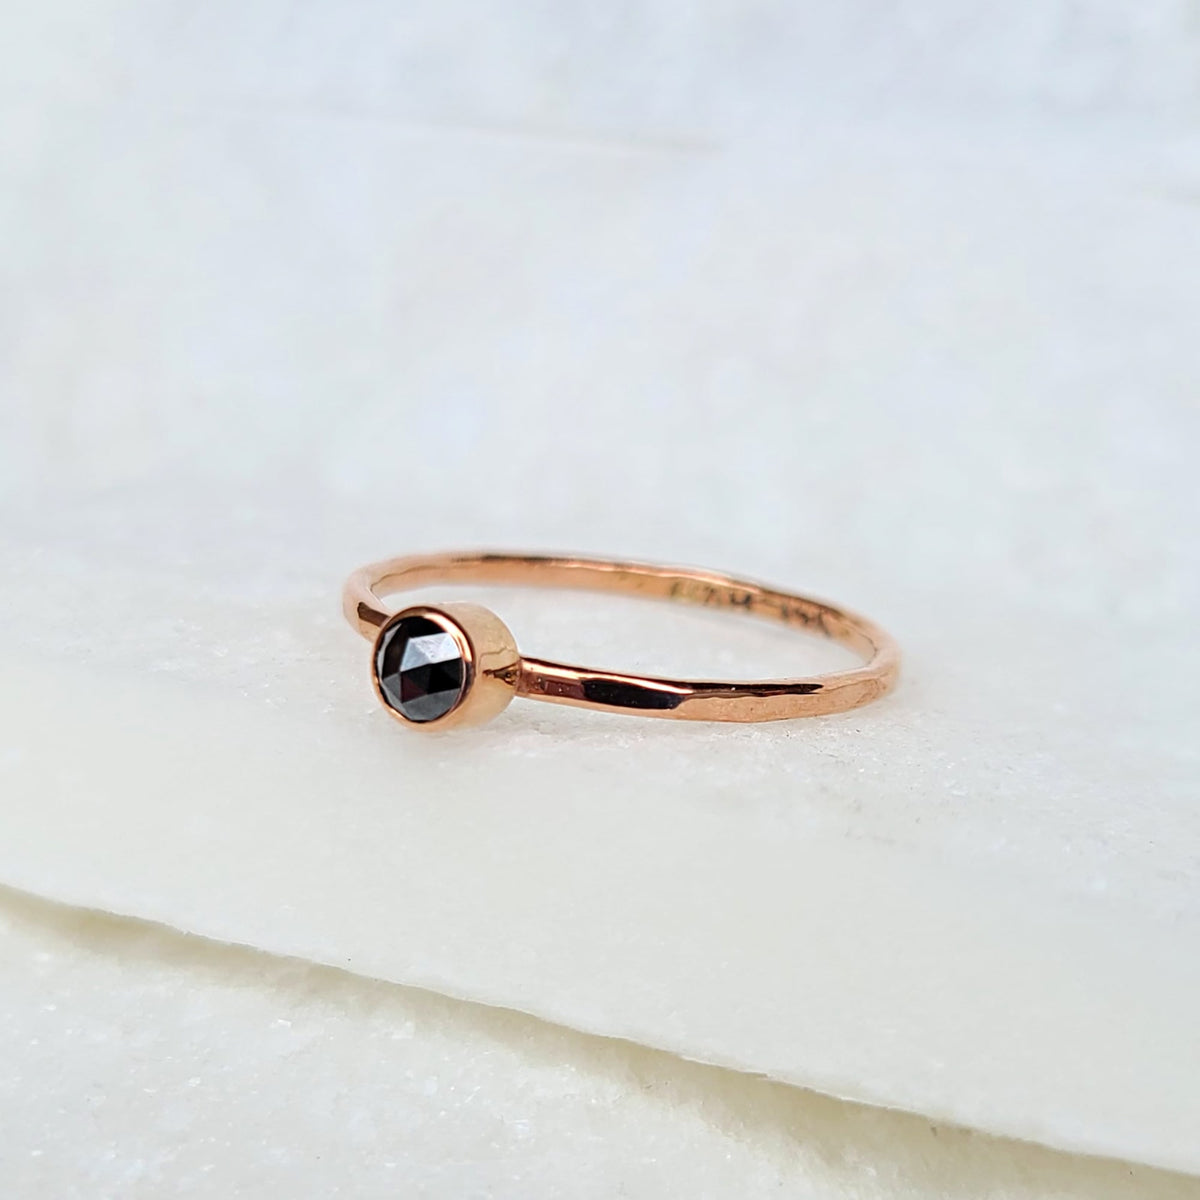 Sincerely Ginger Jewelry 14K Rose Cut Black Diamond Stacking Ring in Rose Gold